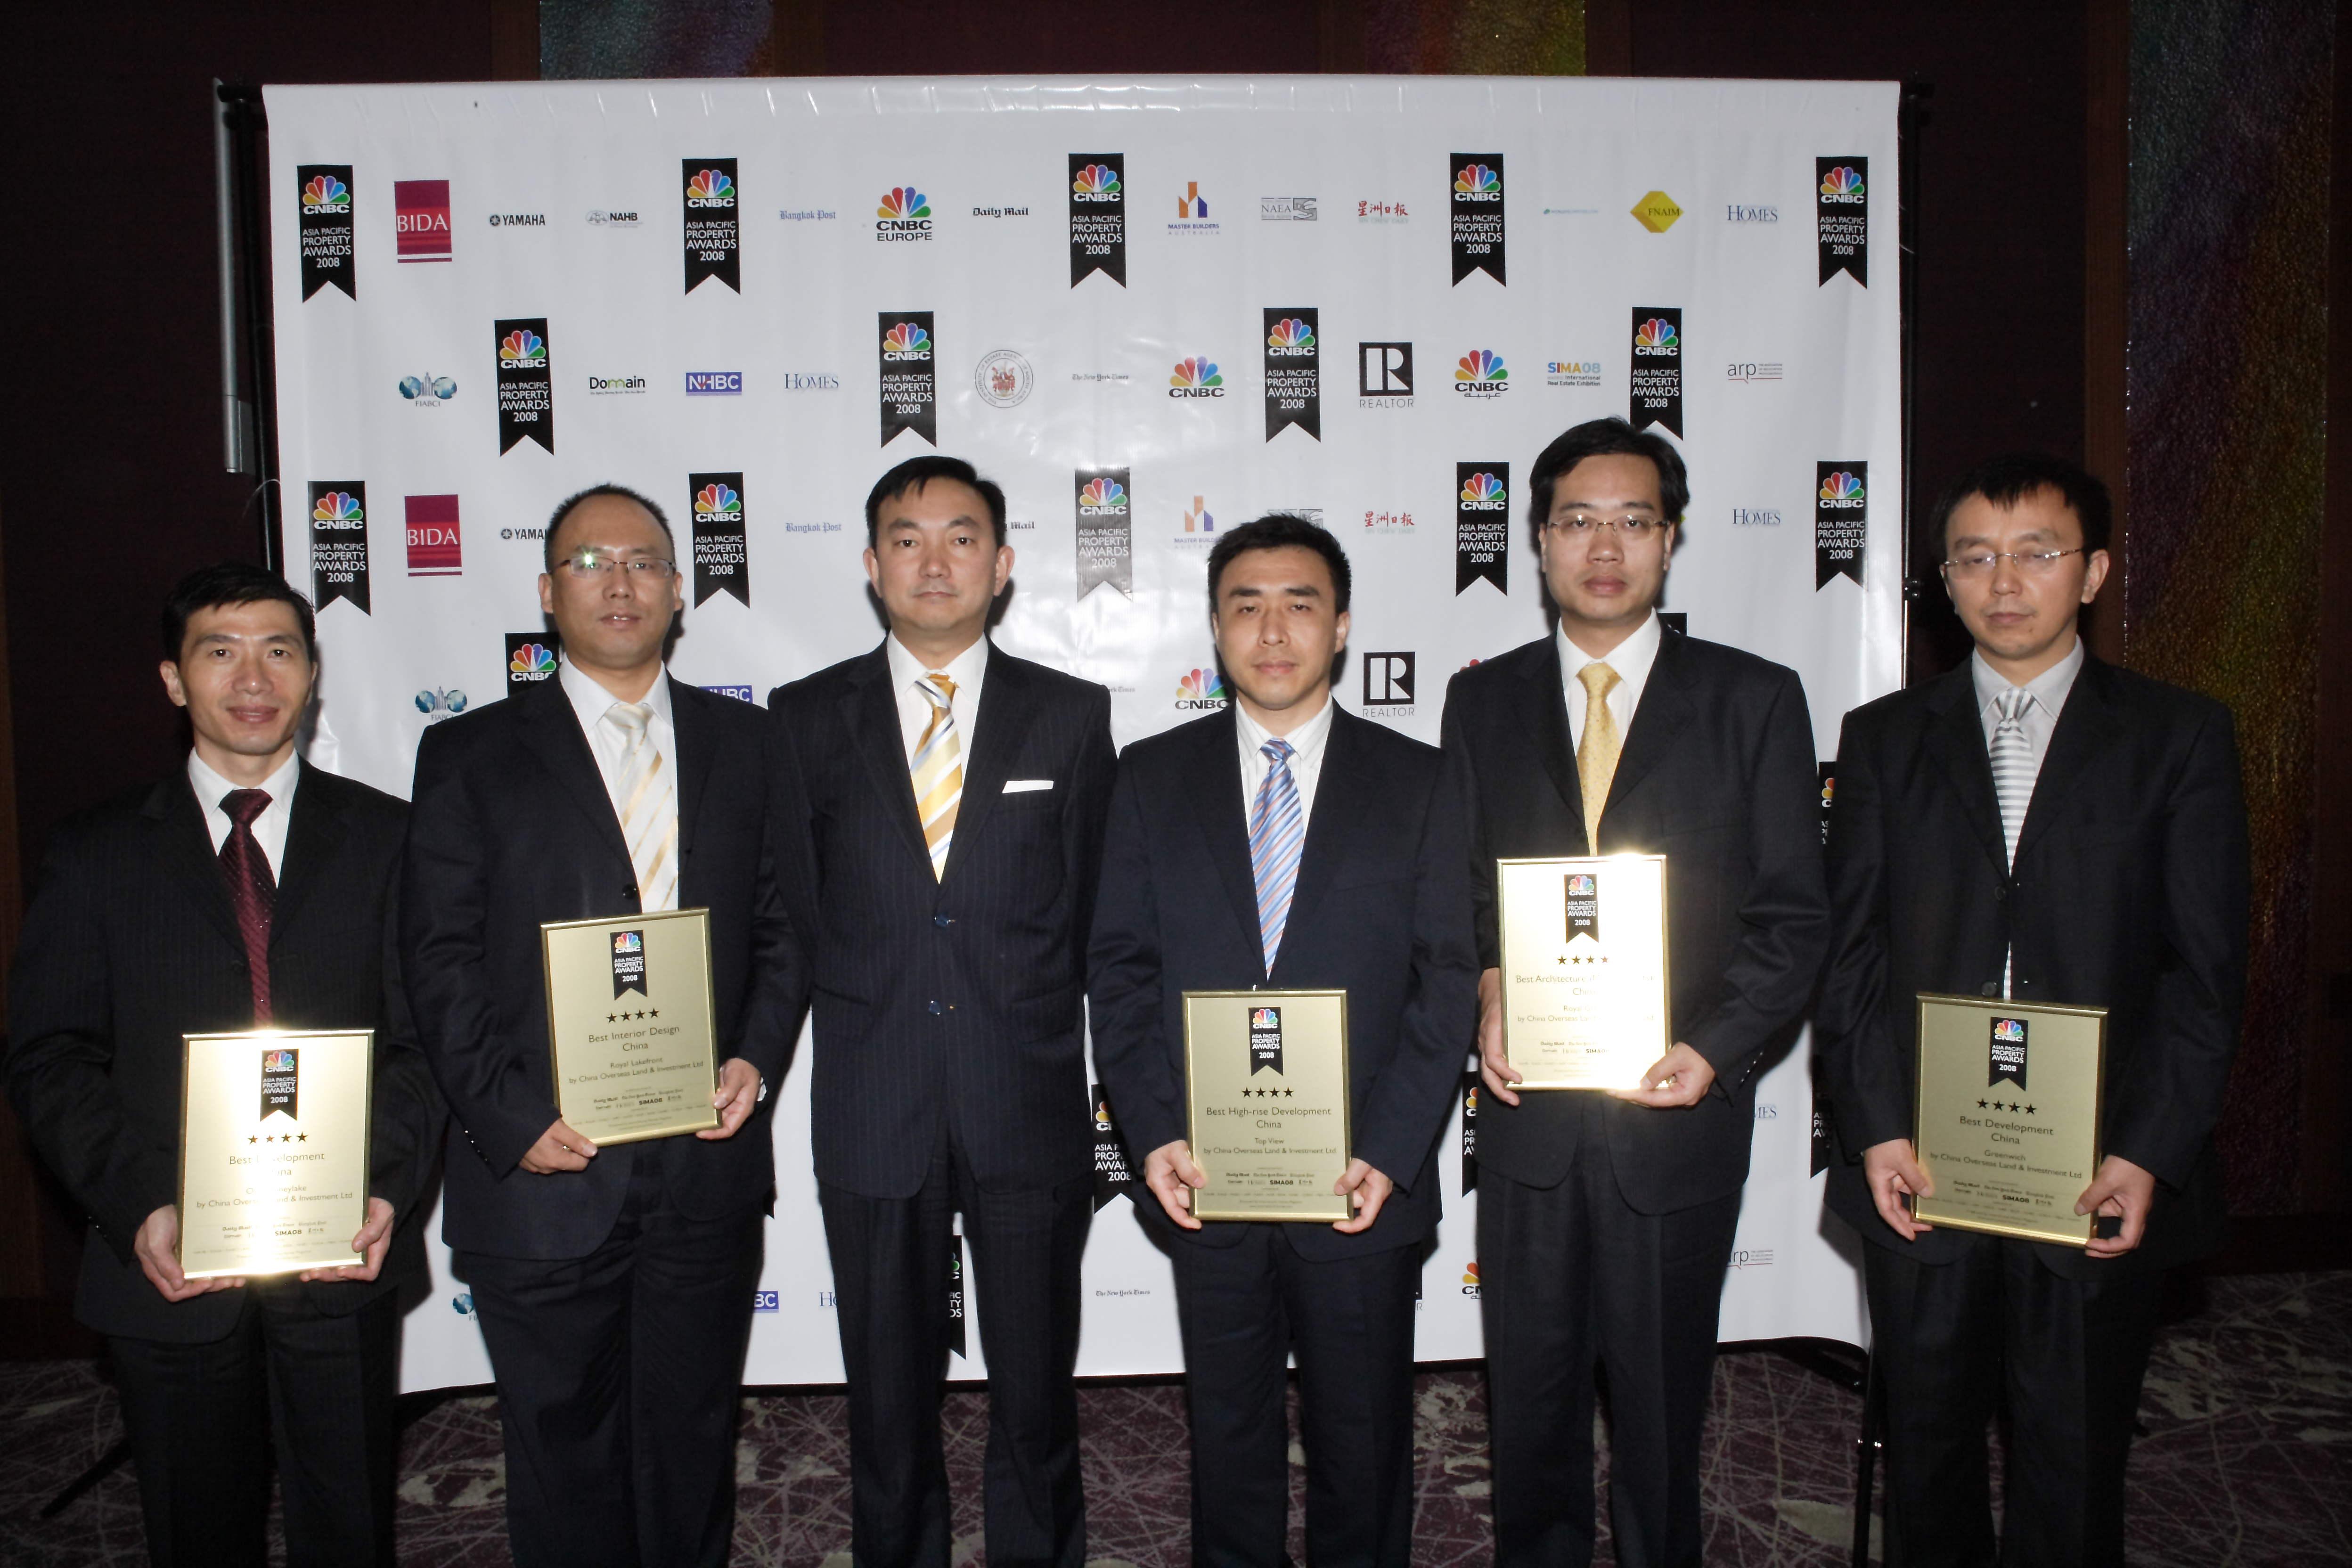 China Overseas garners 5 awards in CNBC International Property Awards 2008 (Asia Pacific)

2008-07-21